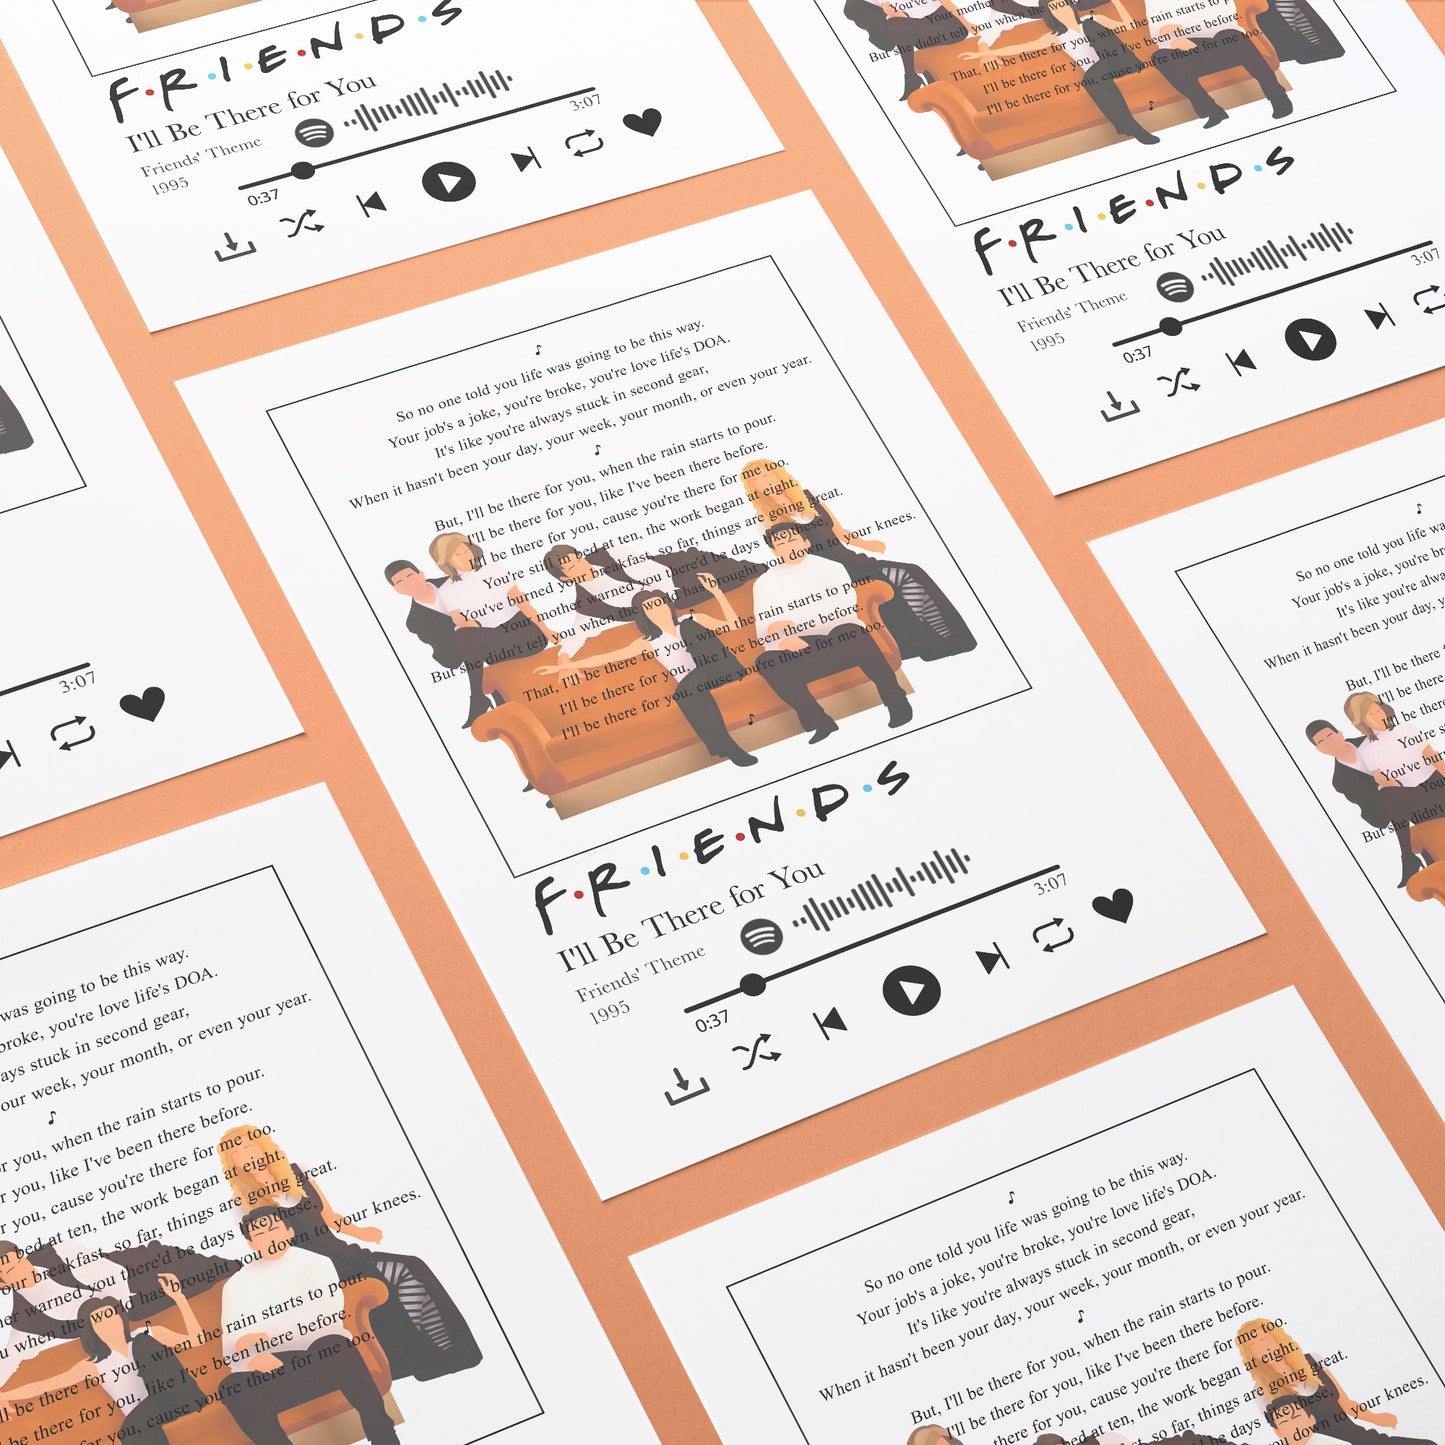 Our Friends - I'll be there for you Prints are here to show the world that you and your best friend always have each other's back! Create a custom print with your favorite song lyrics - or easily add them from Spotify - and hang it on the wall for guaranteed good vibes. Grab one for you and your friend today, and let the world know you've got each other covered!